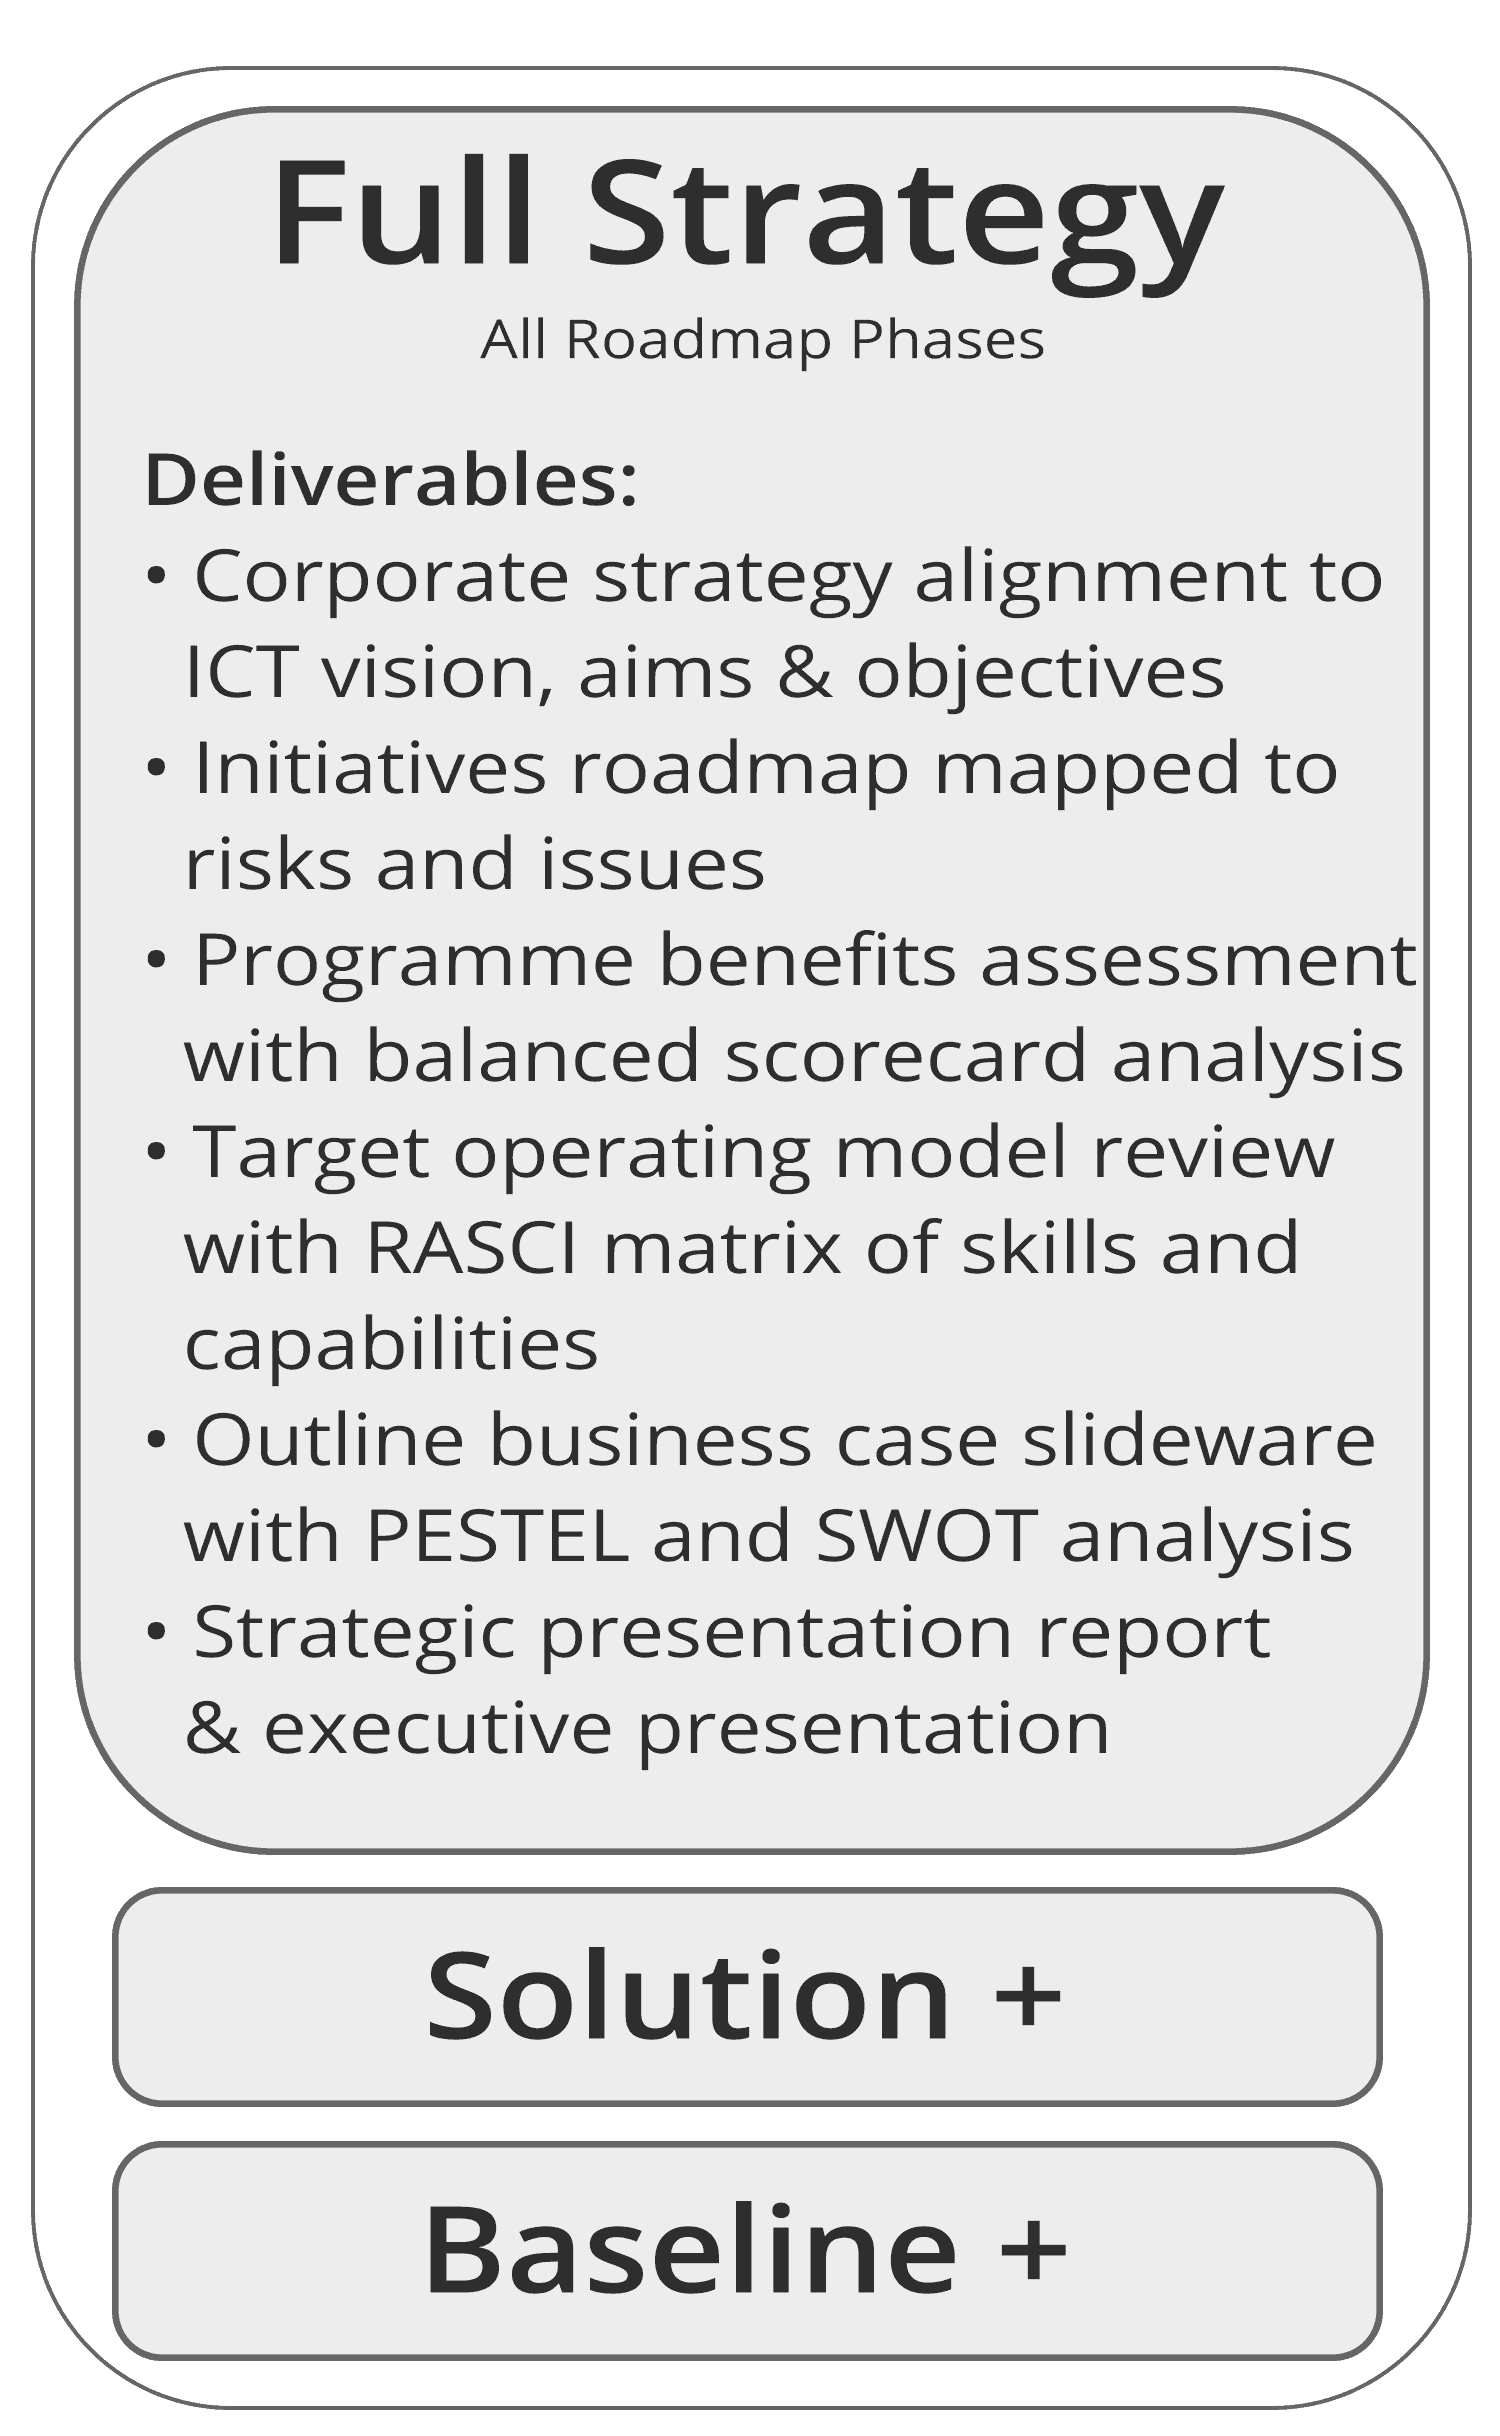 Roadmap-Packages-NEW-full-strategy-2